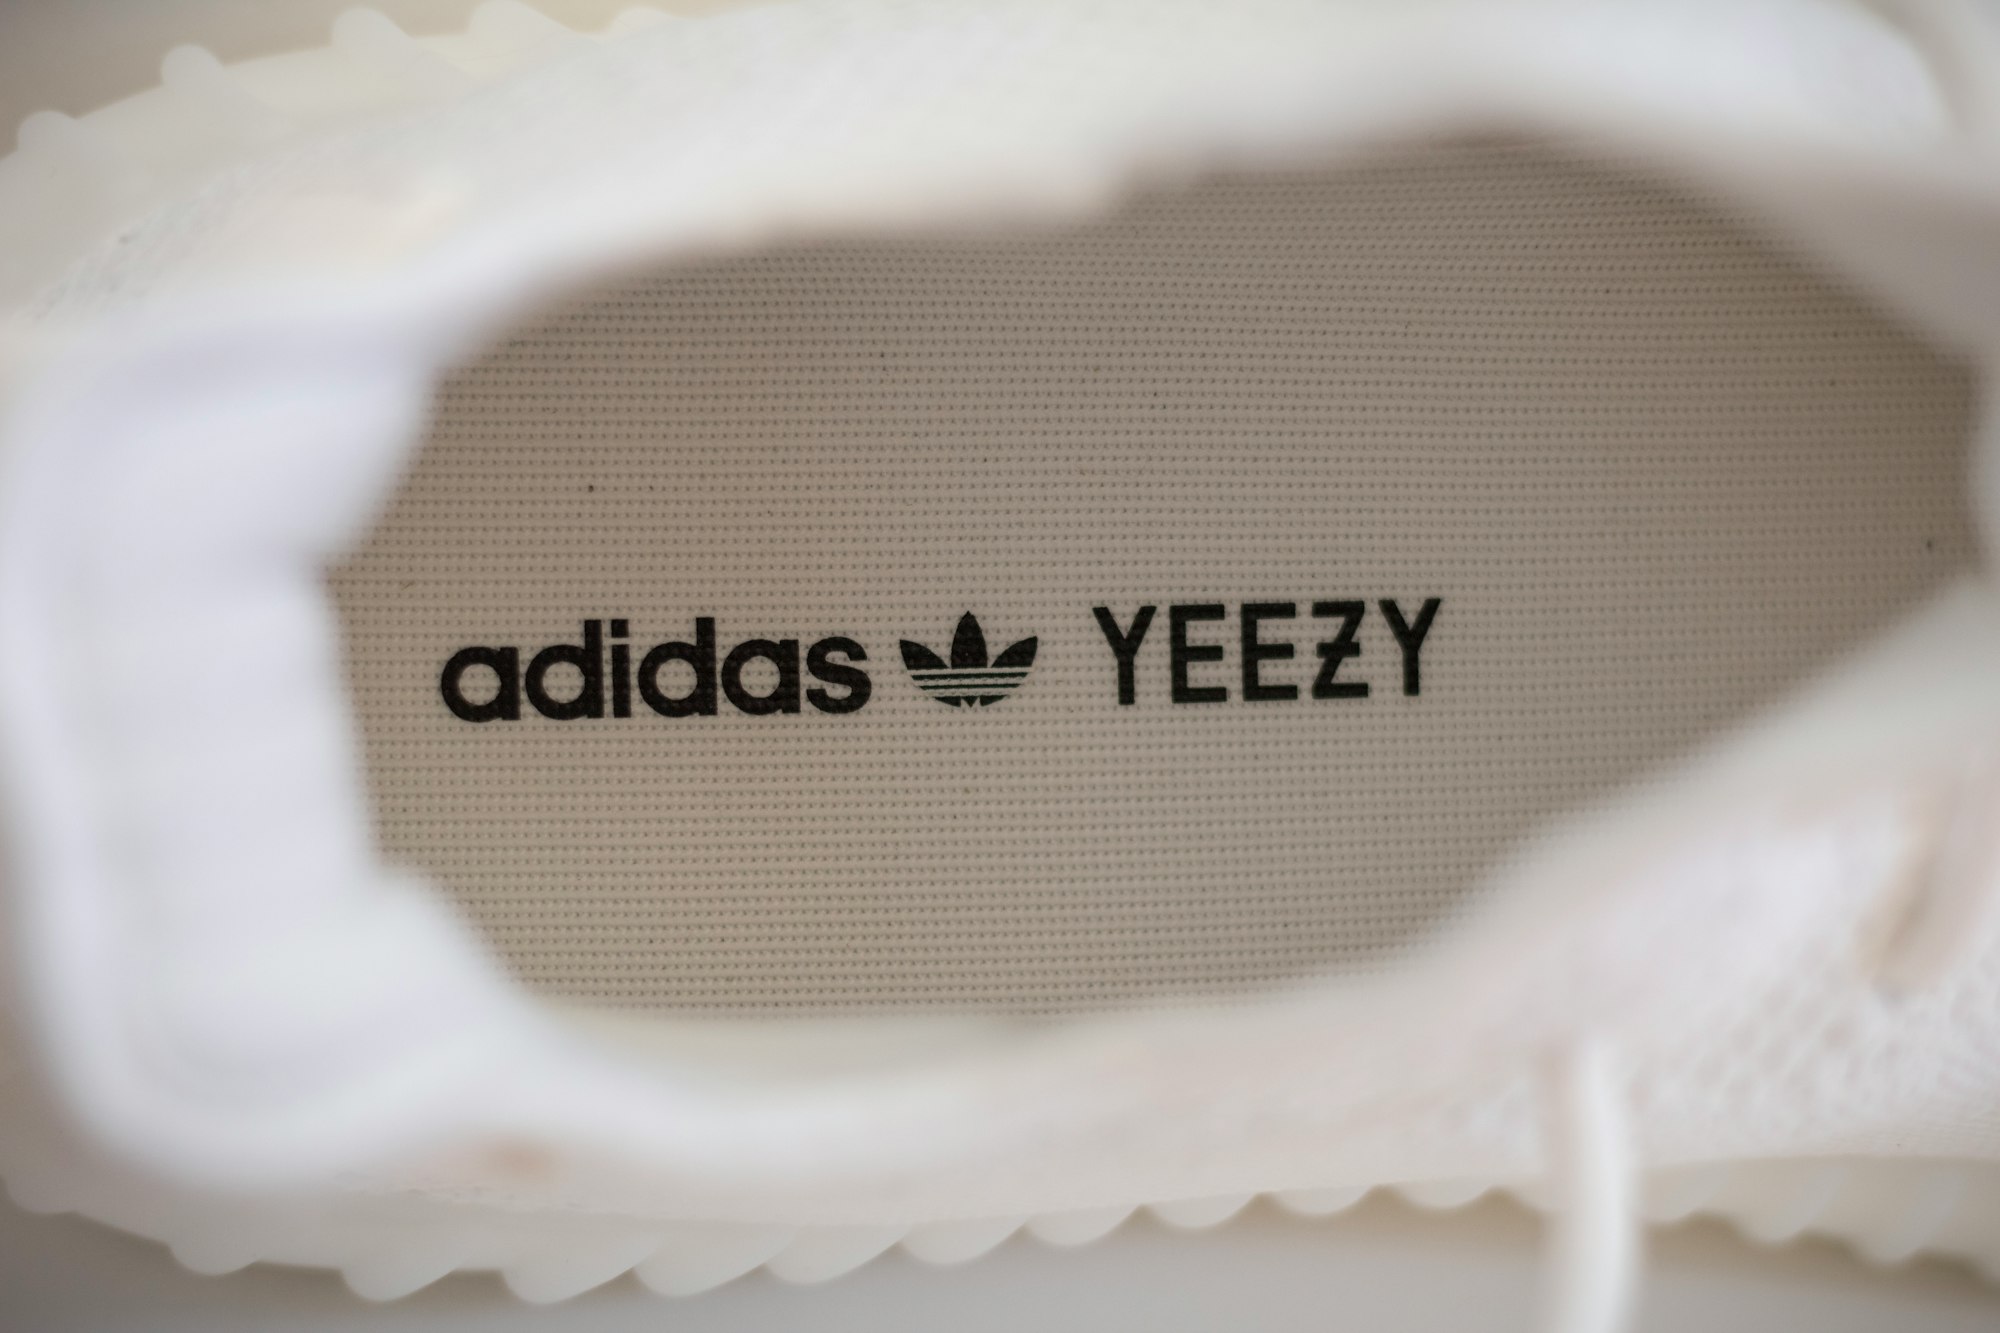 Yeezy Brand Ordered to Pay $300,000 to Freelance Creative Director Over Unpaid Photoshoot.